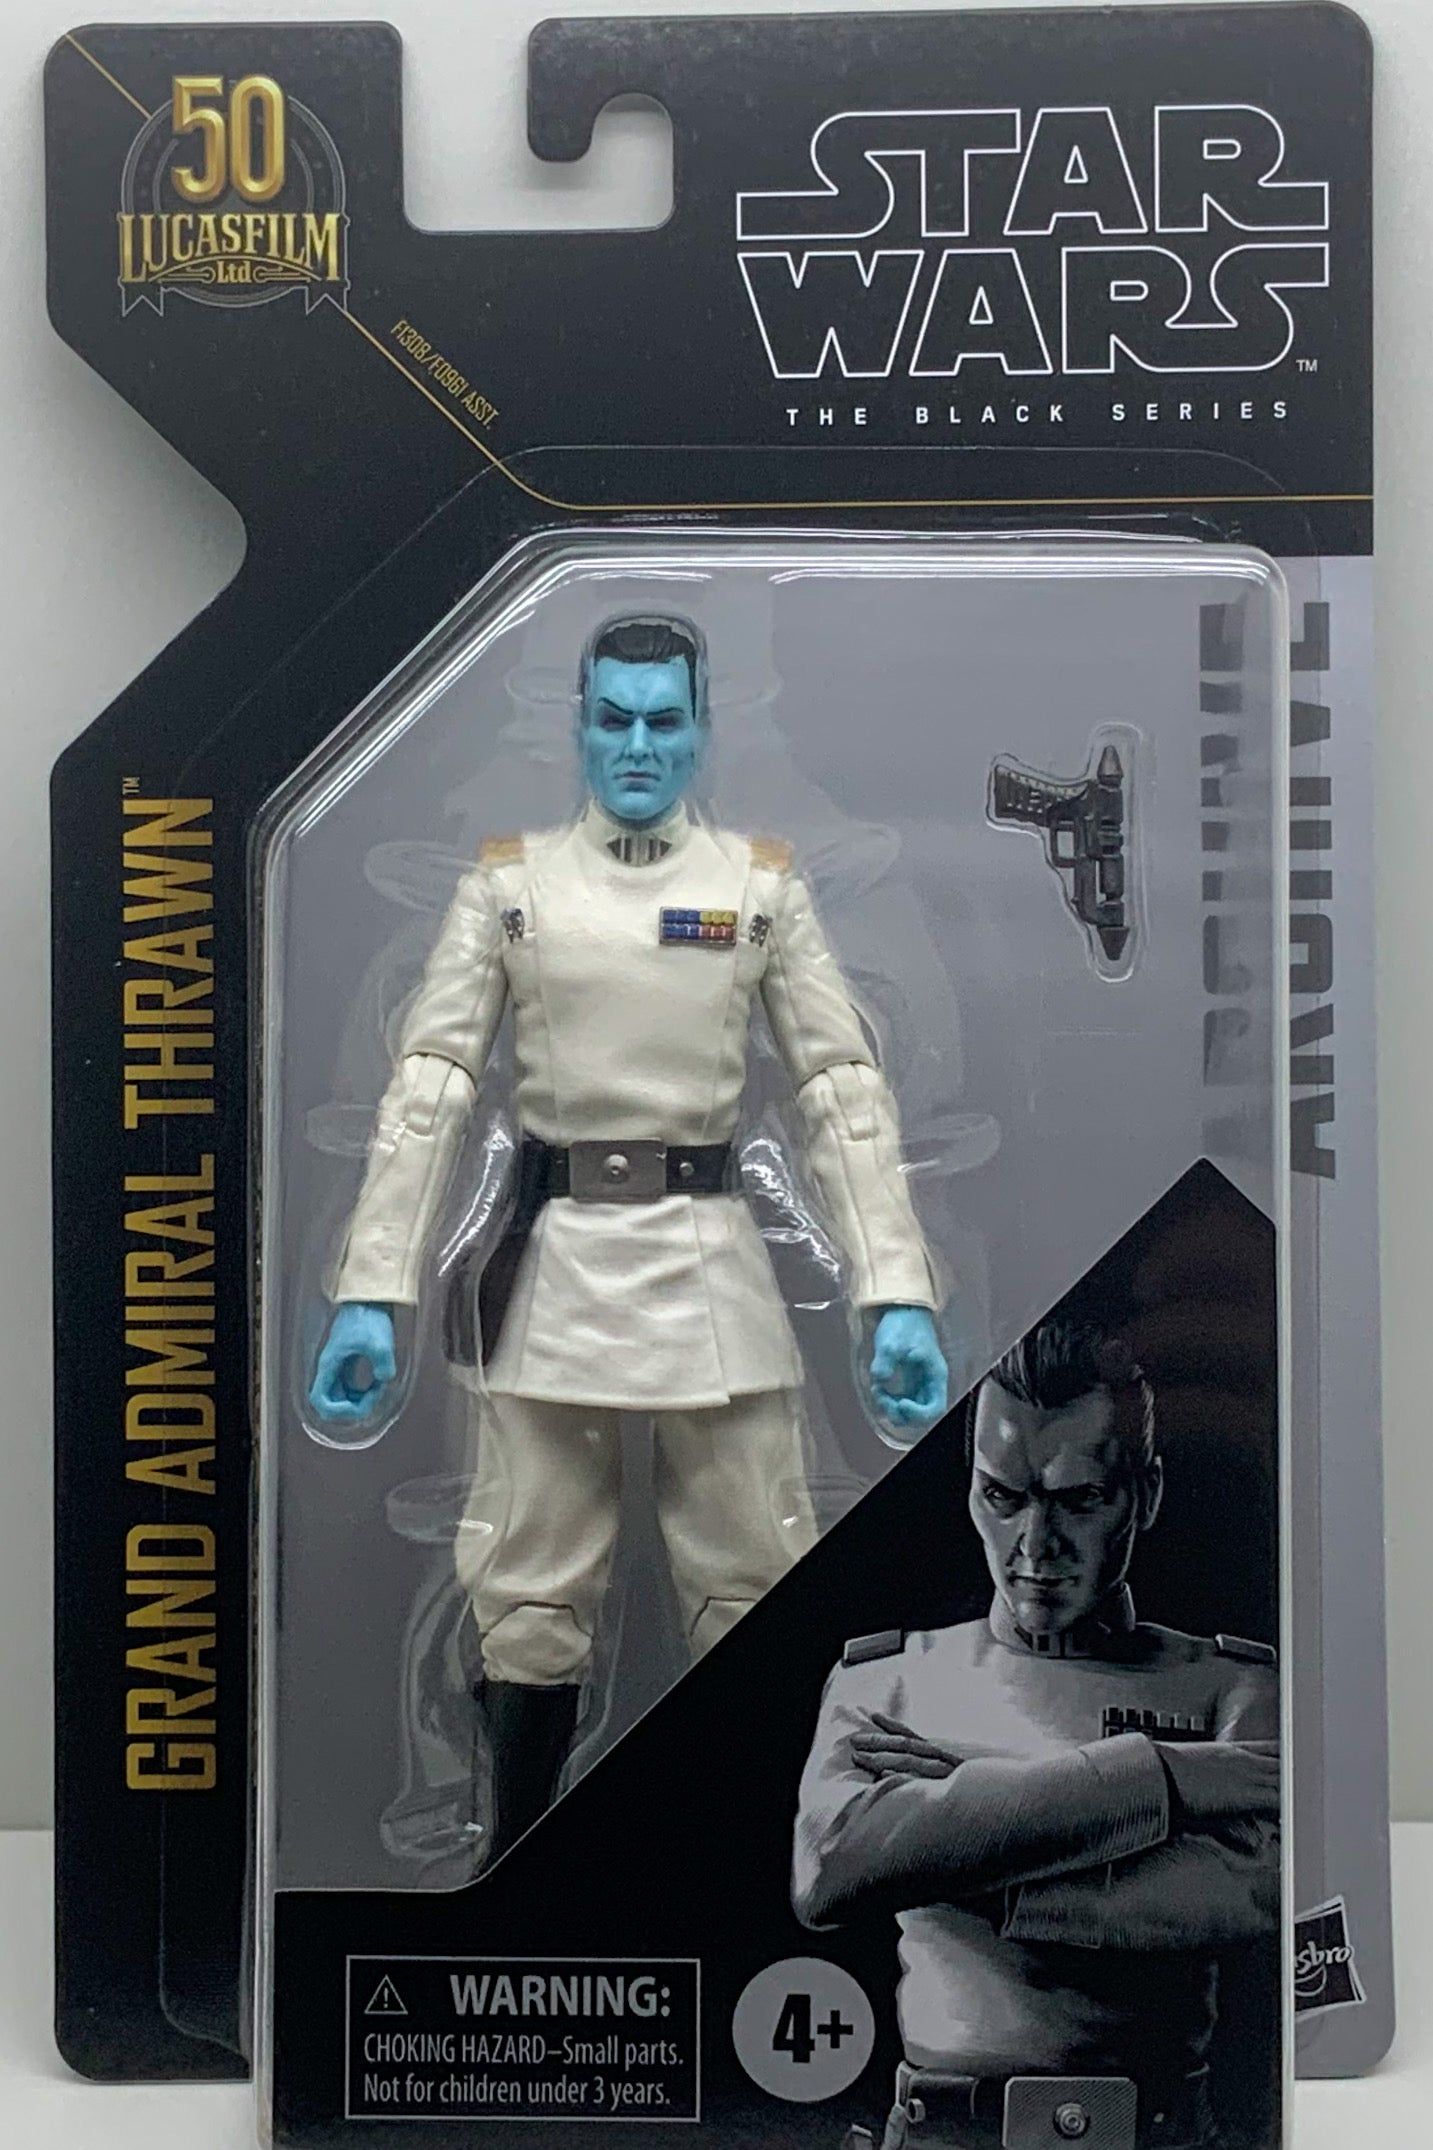 Epic figures from the Star Wars The Black Series return with the Black Series Archive 6-inch-scale action figures, featuring photoreal deco and premium design This Star Wars The Black Series action figure comes with a Grand Admiral Thrawn-inspired accessory that makes a great addition to any Star Wars collection Buy at TatoyShop.com